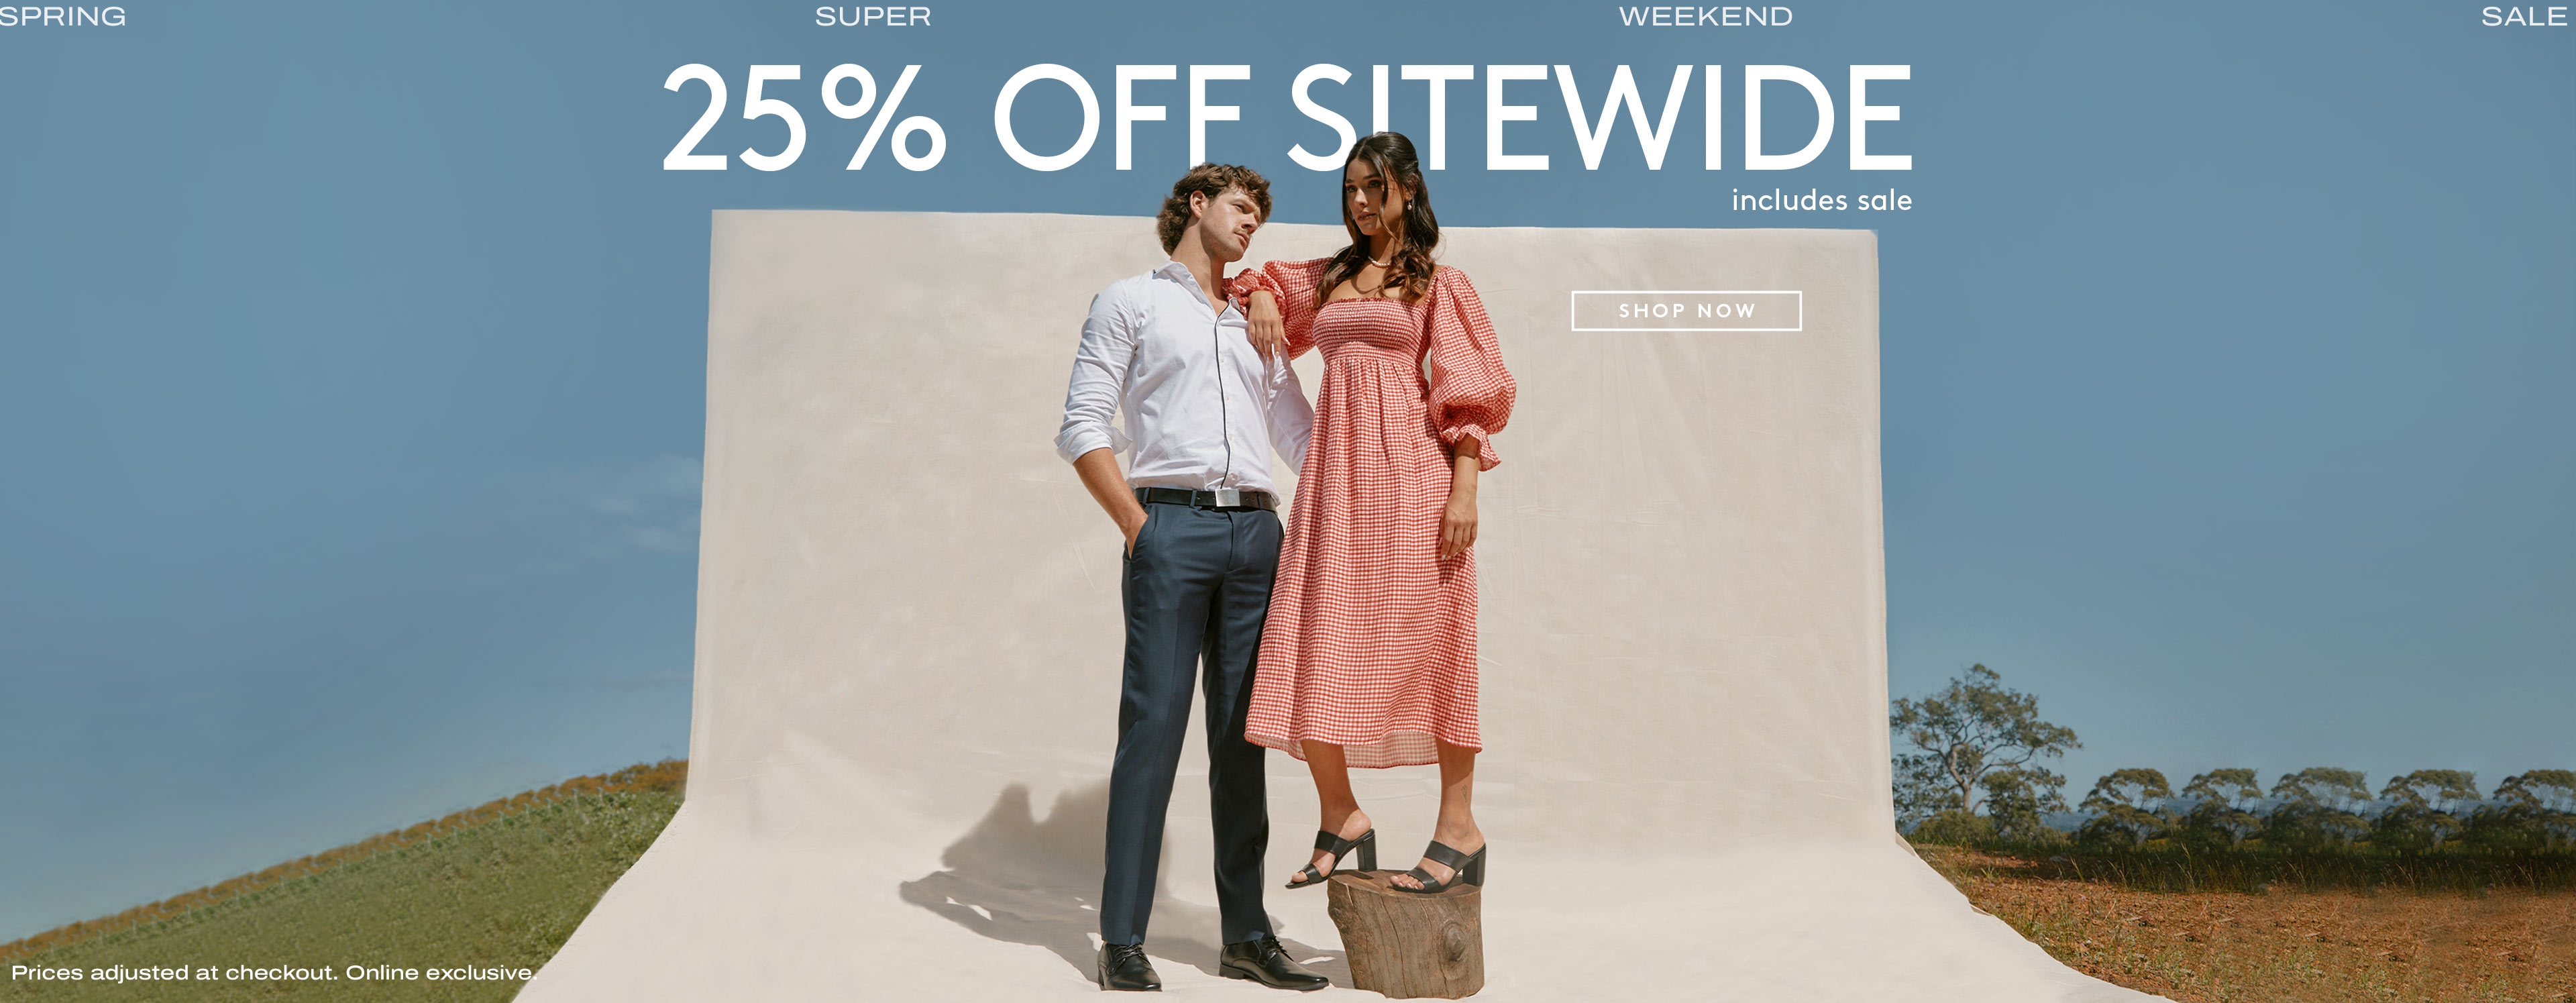 Betts Super Weekend - 25% OFF sitewide including sale items